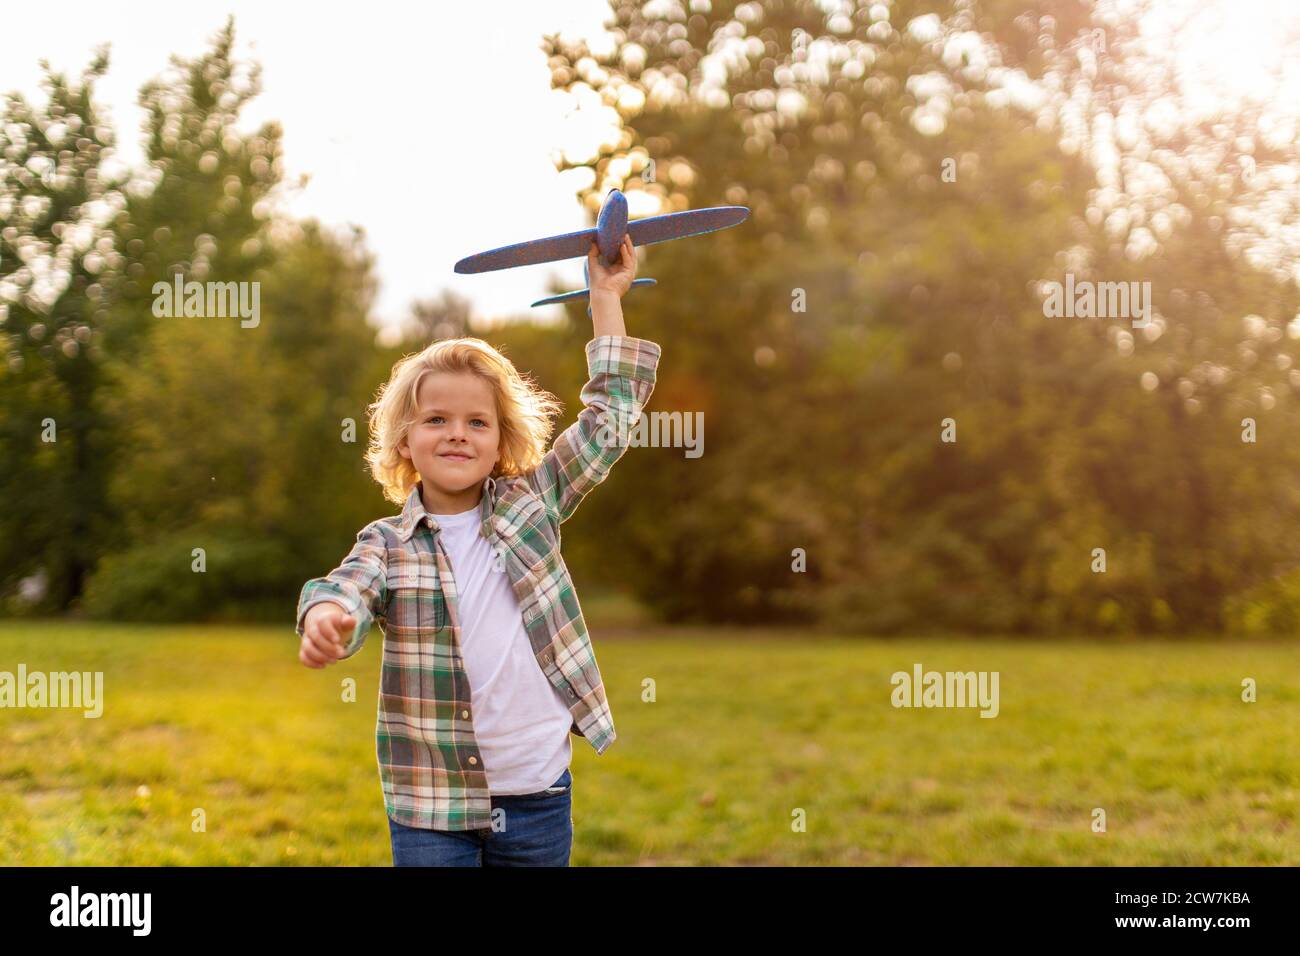 Little boy playing with toy plane in park Stock Photo